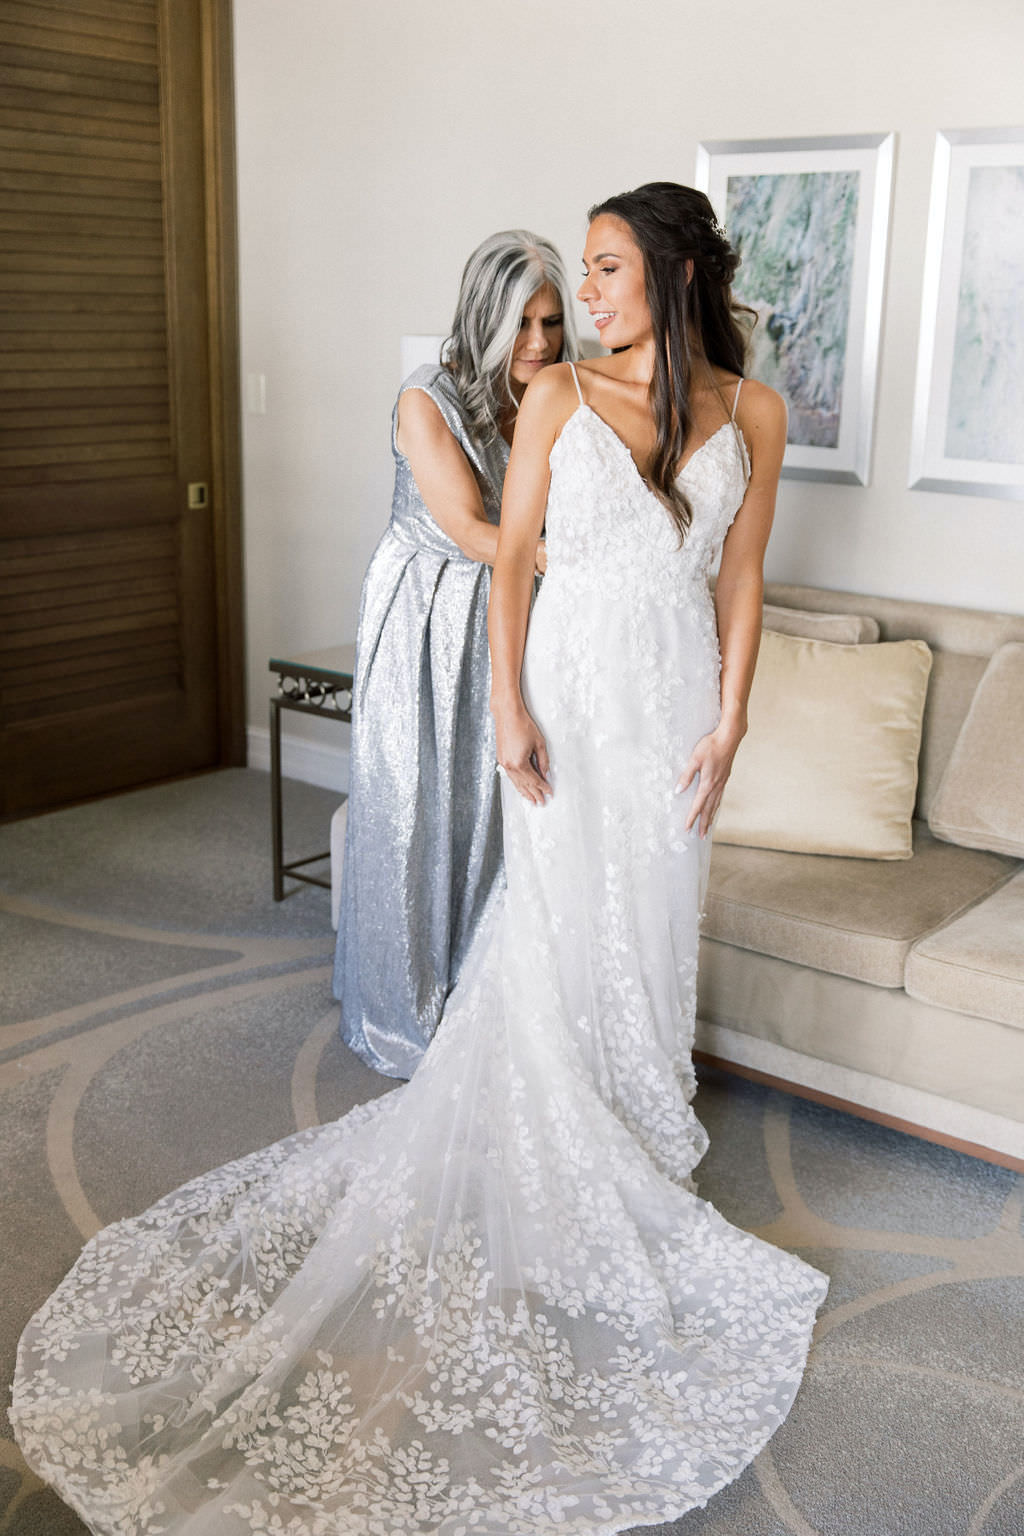 Elegant Florida Bride and Mother Getting Ready Portrait, Wearing White Spaghetti Strap Floral Lace Lazaro Wedding Dress with Train, Mother in Midnight Silver Moon Inspired Long Dress